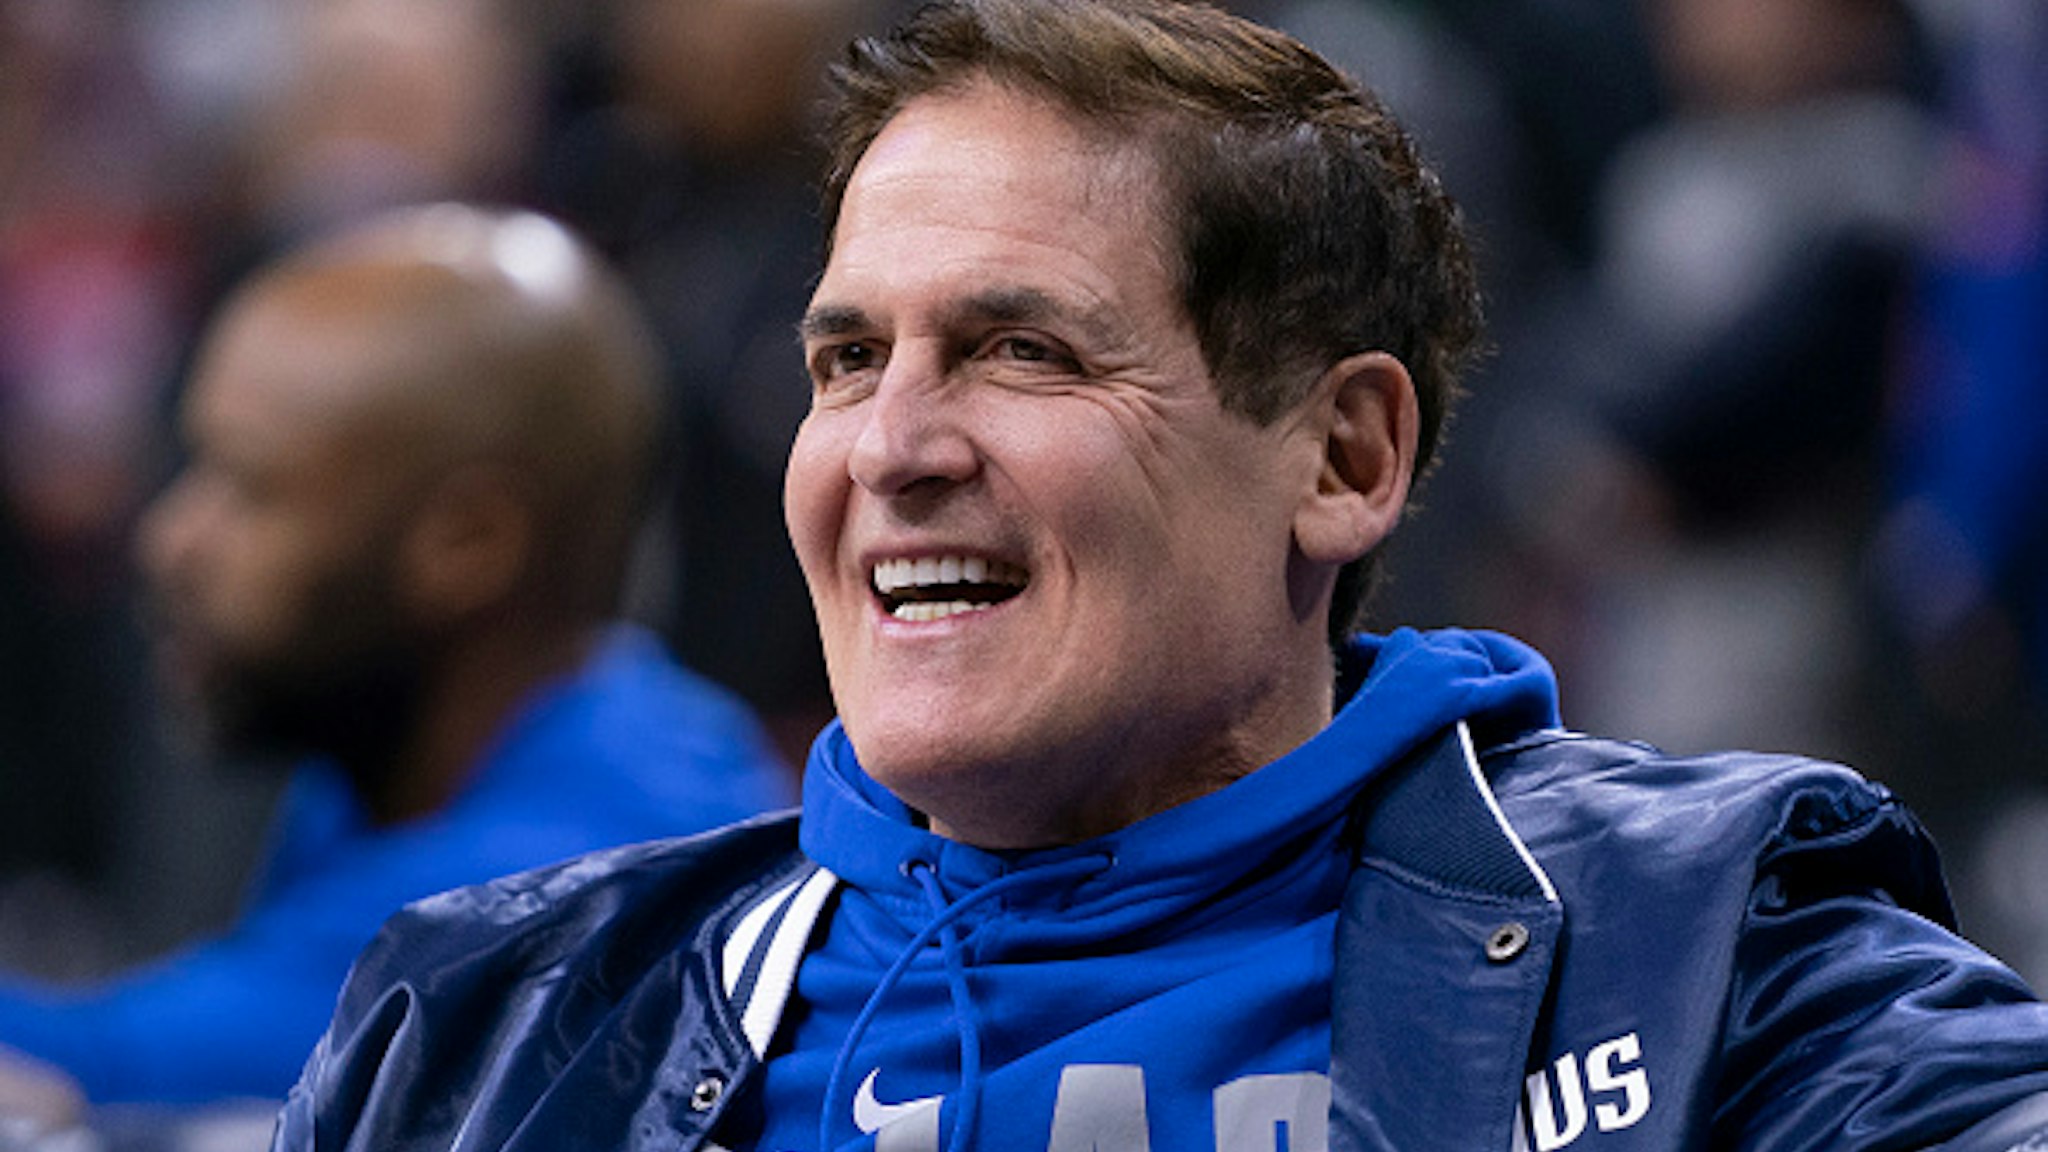 PHILADELPHIA, PA - DECEMBER 20: Owner Mark Cuban of the Dallas Mavericks reacts prior to the game against the Philadelphia 76ers at the Wells Fargo Center on December 20, 2019 in Philadelphia, Pennsylvania. NOTE TO USER: User expressly acknowledges and agrees that, by downloading and/or using this photograph, user is consenting to the terms and conditions of the Getty Images License Agreement.